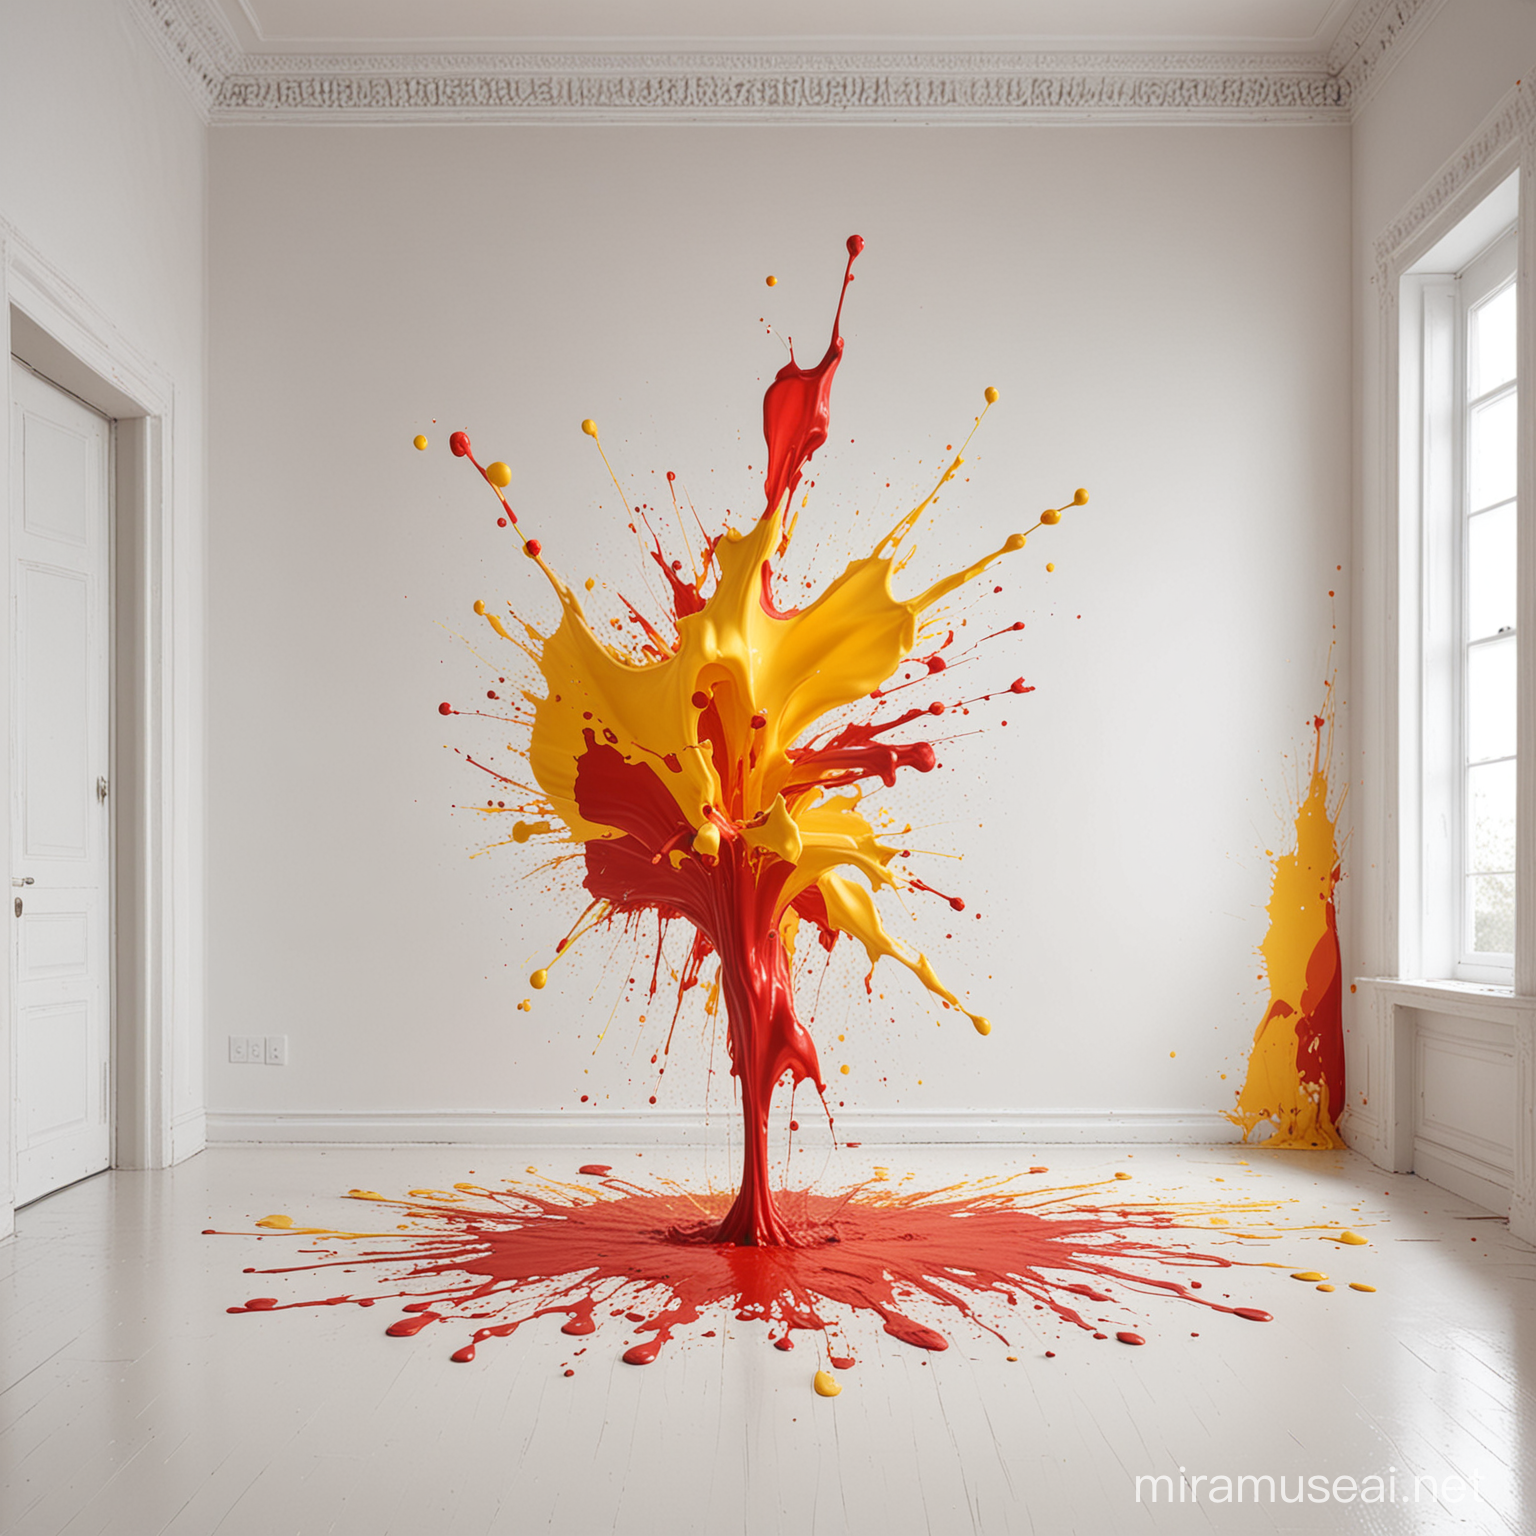 Vibrant Yellow and Red Paint Splashes Illuminate a Serene White Room